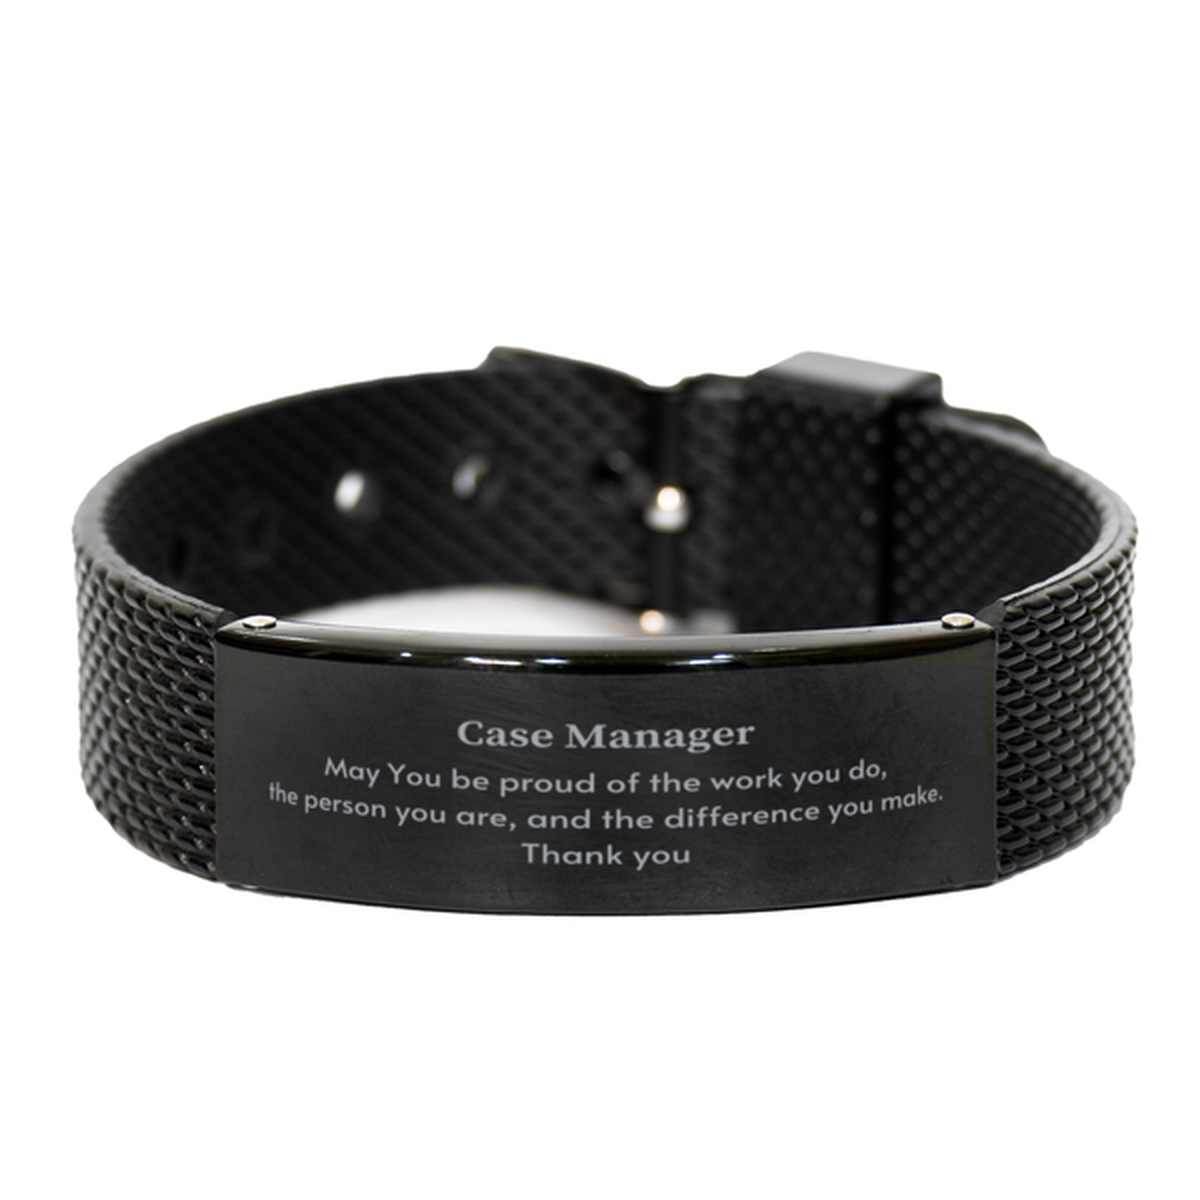 Heartwarming Black Shark Mesh Bracelet Retirement Coworkers Gifts for Case Manager, Case Manager May You be proud of the work you do, the person you are Gifts for Boss Men Women Friends